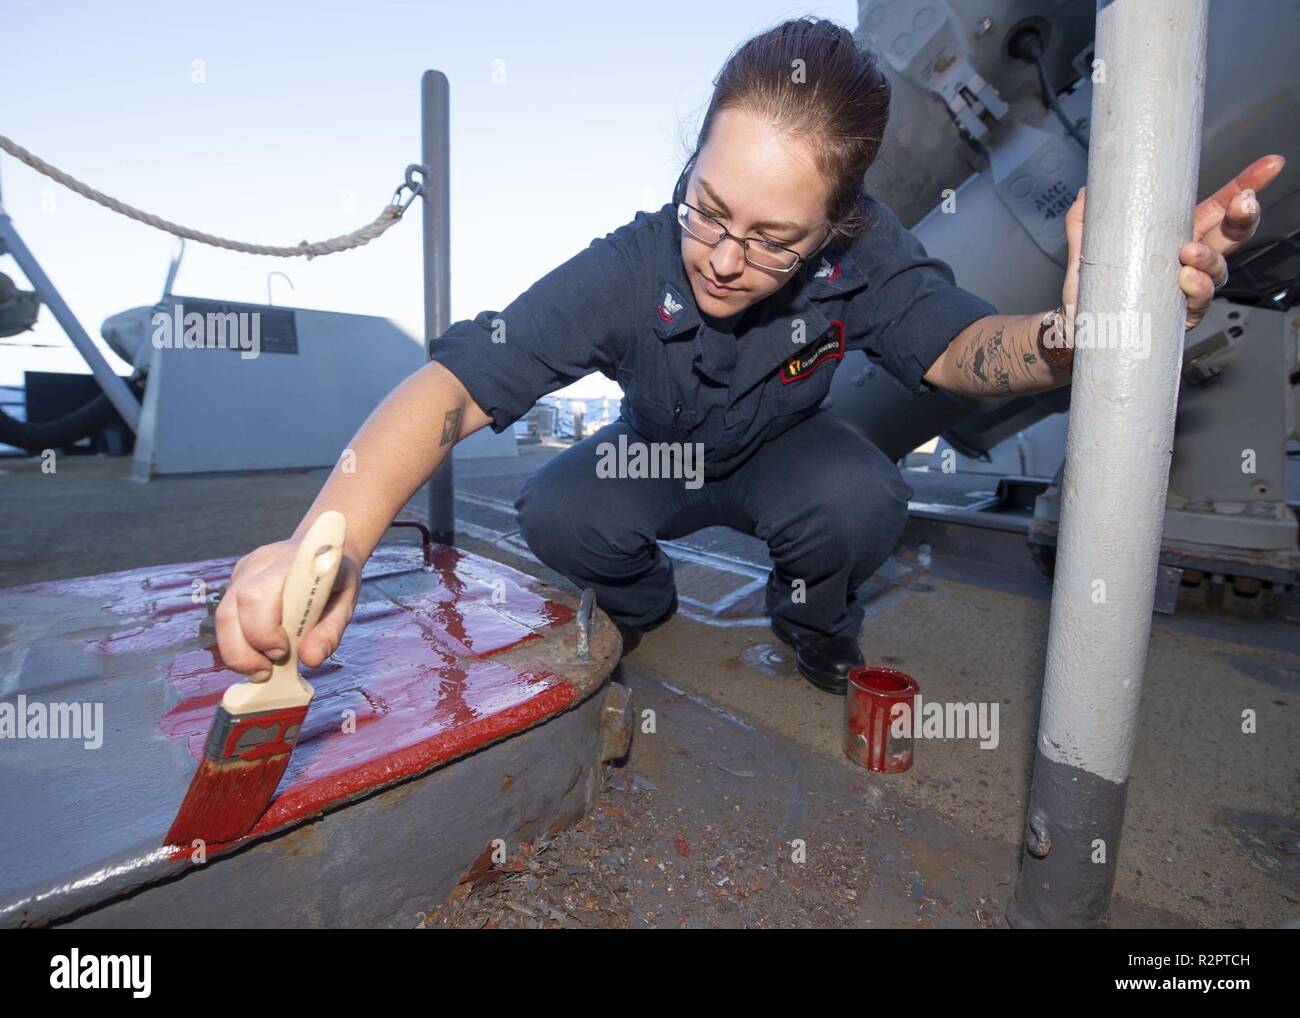 MEDITERRANEAN SEA (Oct. 29, 2018) Fire Controlman 2nd Class Katherine Domenico primes a deck hatch aboard the Arleigh Burke-class guided-missile destroyer USS Arleigh Burke (DDG 51) in the Mediterranean Sea Oct. 29, 2018. Arleigh Burke, homeported at Naval Station Norfolk, is conducting naval operations in the U.S. 6th Fleet area of operations in support of U.S. national security interests in Europe and Africa. Stock Photo